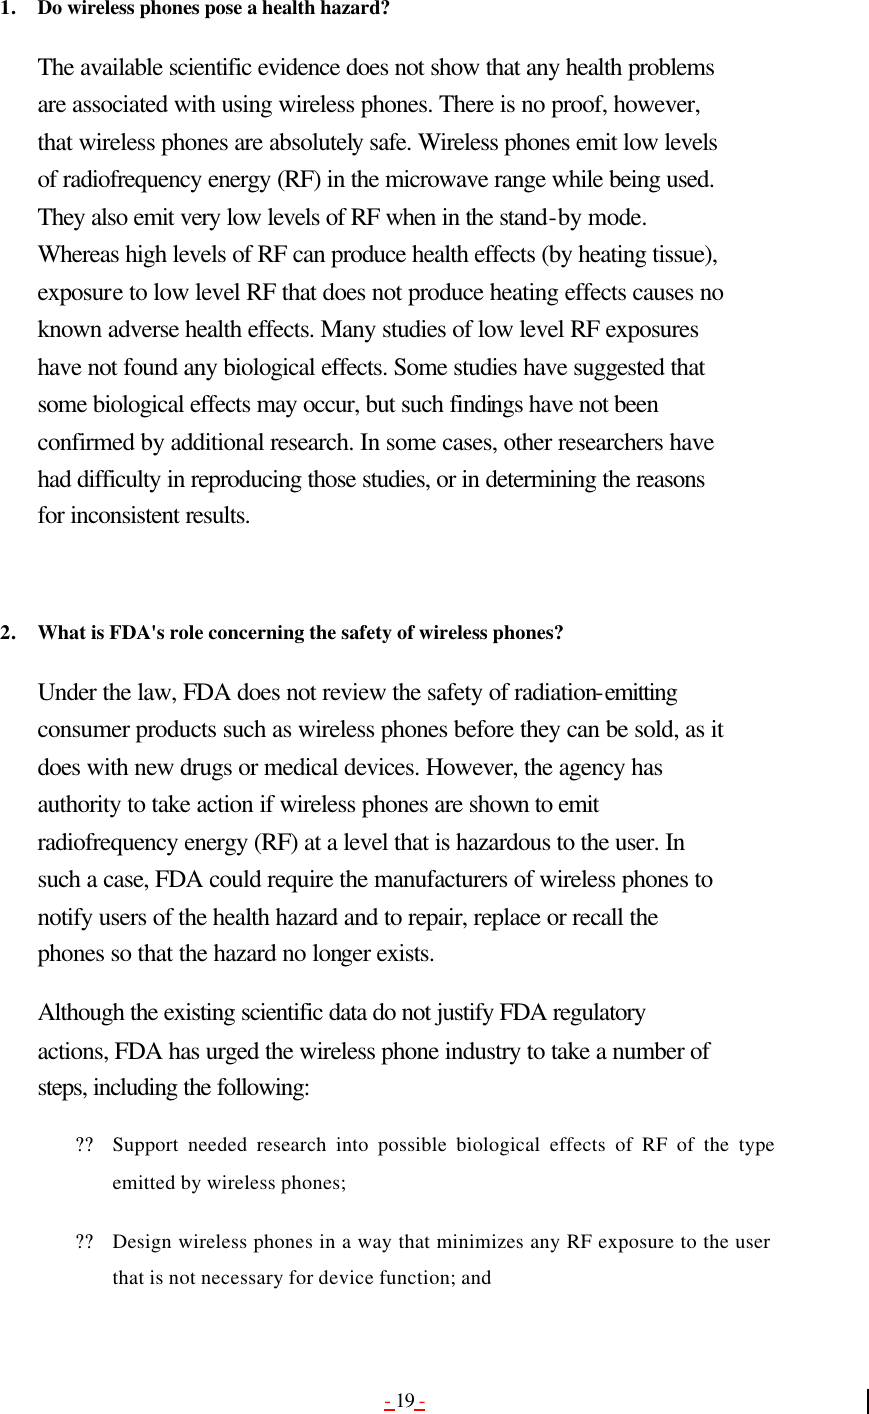 - 19 -  1. Do wireless phones pose a health hazard?  The available scientific evidence does not show that any health problems are associated with using wireless phones. There is no proof, however, that wireless phones are absolutely safe. Wireless phones emit low levels of radiofrequency energy (RF) in the microwave range while being used. They also emit very low levels of RF when in the stand-by mode. Whereas high levels of RF can produce health effects (by heating tissue), exposure to low level RF that does not produce heating effects causes no known adverse health effects. Many studies of low level RF exposures have not found any biological effects. Some studies have suggested that some biological effects may occur, but such findings have not been confirmed by additional research. In some cases, other researchers have had difficulty in reproducing those studies, or in determining the reasons for inconsistent results.   2. What is FDA&apos;s role concerning the safety of wireless phones?  Under the law, FDA does not review the safety of radiation-emitting consumer products such as wireless phones before they can be sold, as it does with new drugs or medical devices. However, the agency has authority to take action if wireless phones are shown to emit radiofrequency energy (RF) at a level that is hazardous to the user. In such a case, FDA could require the manufacturers of wireless phones to notify users of the health hazard and to repair, replace or recall the phones so that the hazard no longer exists. Although the existing scientific data do not justify FDA regulatory actions, FDA has urged the wireless phone industry to take a number of steps, including the following: ?? Support needed research into possible biological effects of RF of the type emitted by wireless phones;   ?? Design wireless phones in a way that minimizes any RF exposure to the user that is not necessary for device function; and   